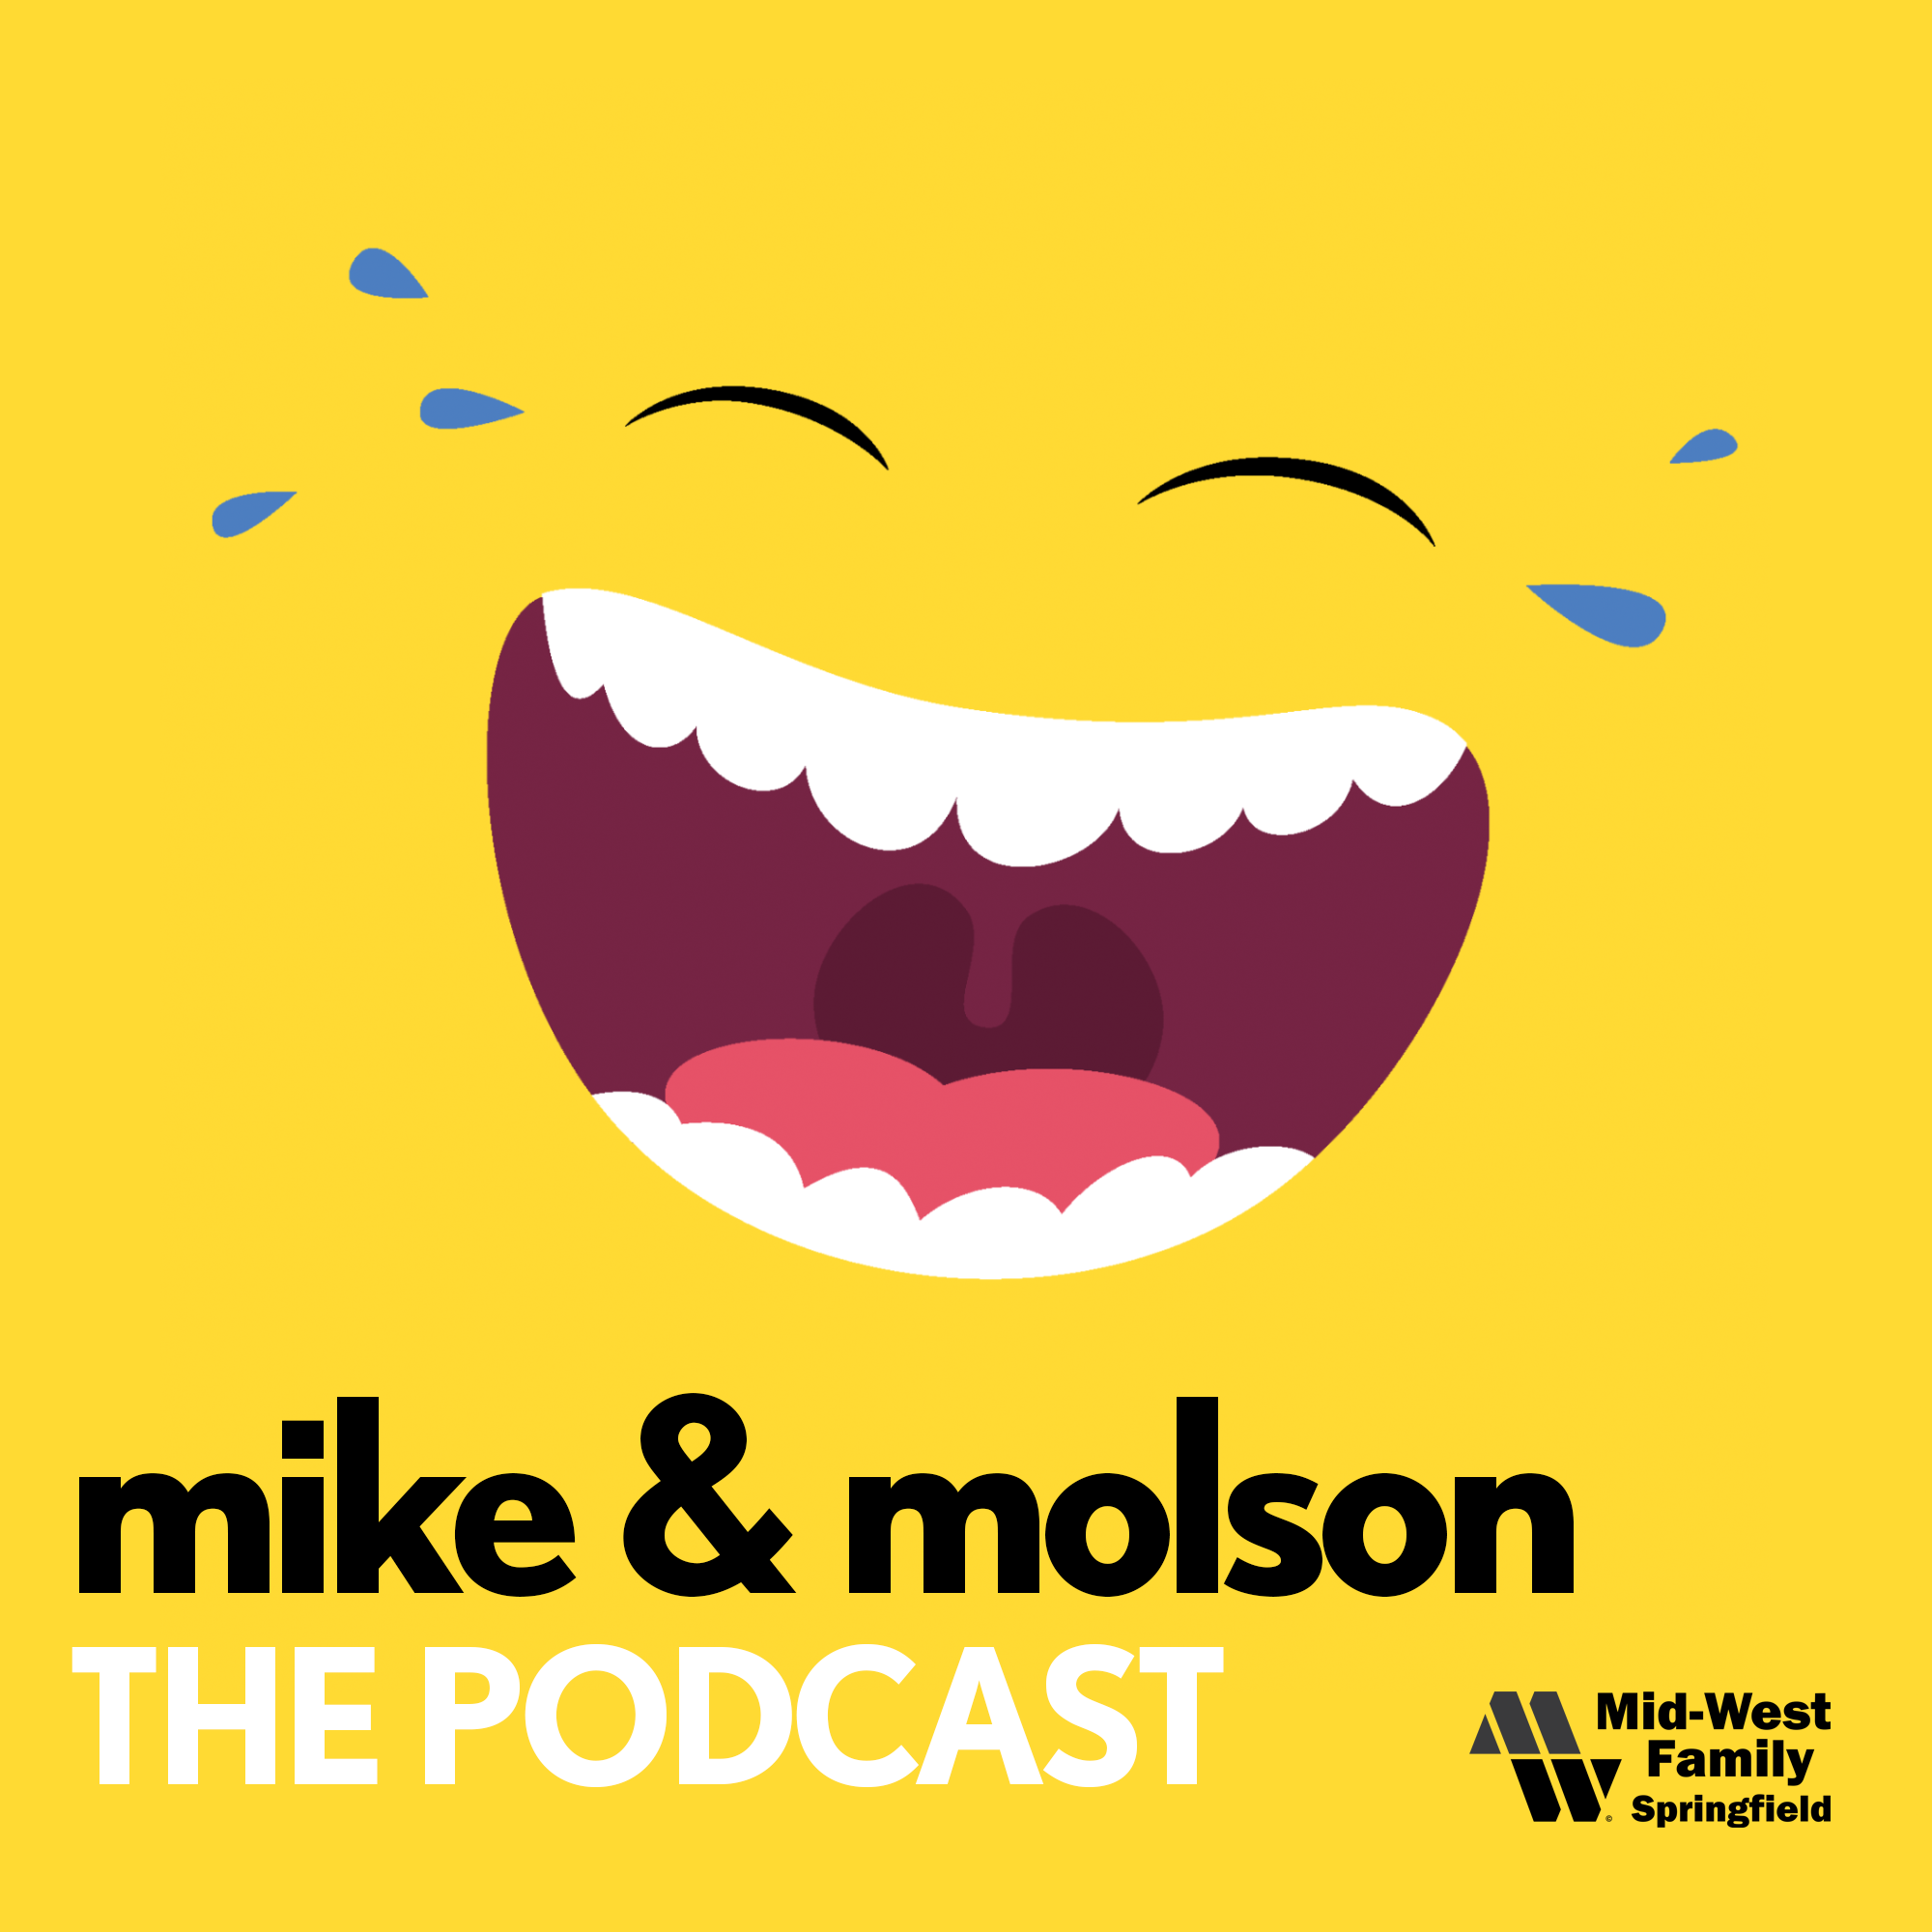 Mike & Molson Too Good For Radio Podcast Year 2 Episode 9 International Dongage